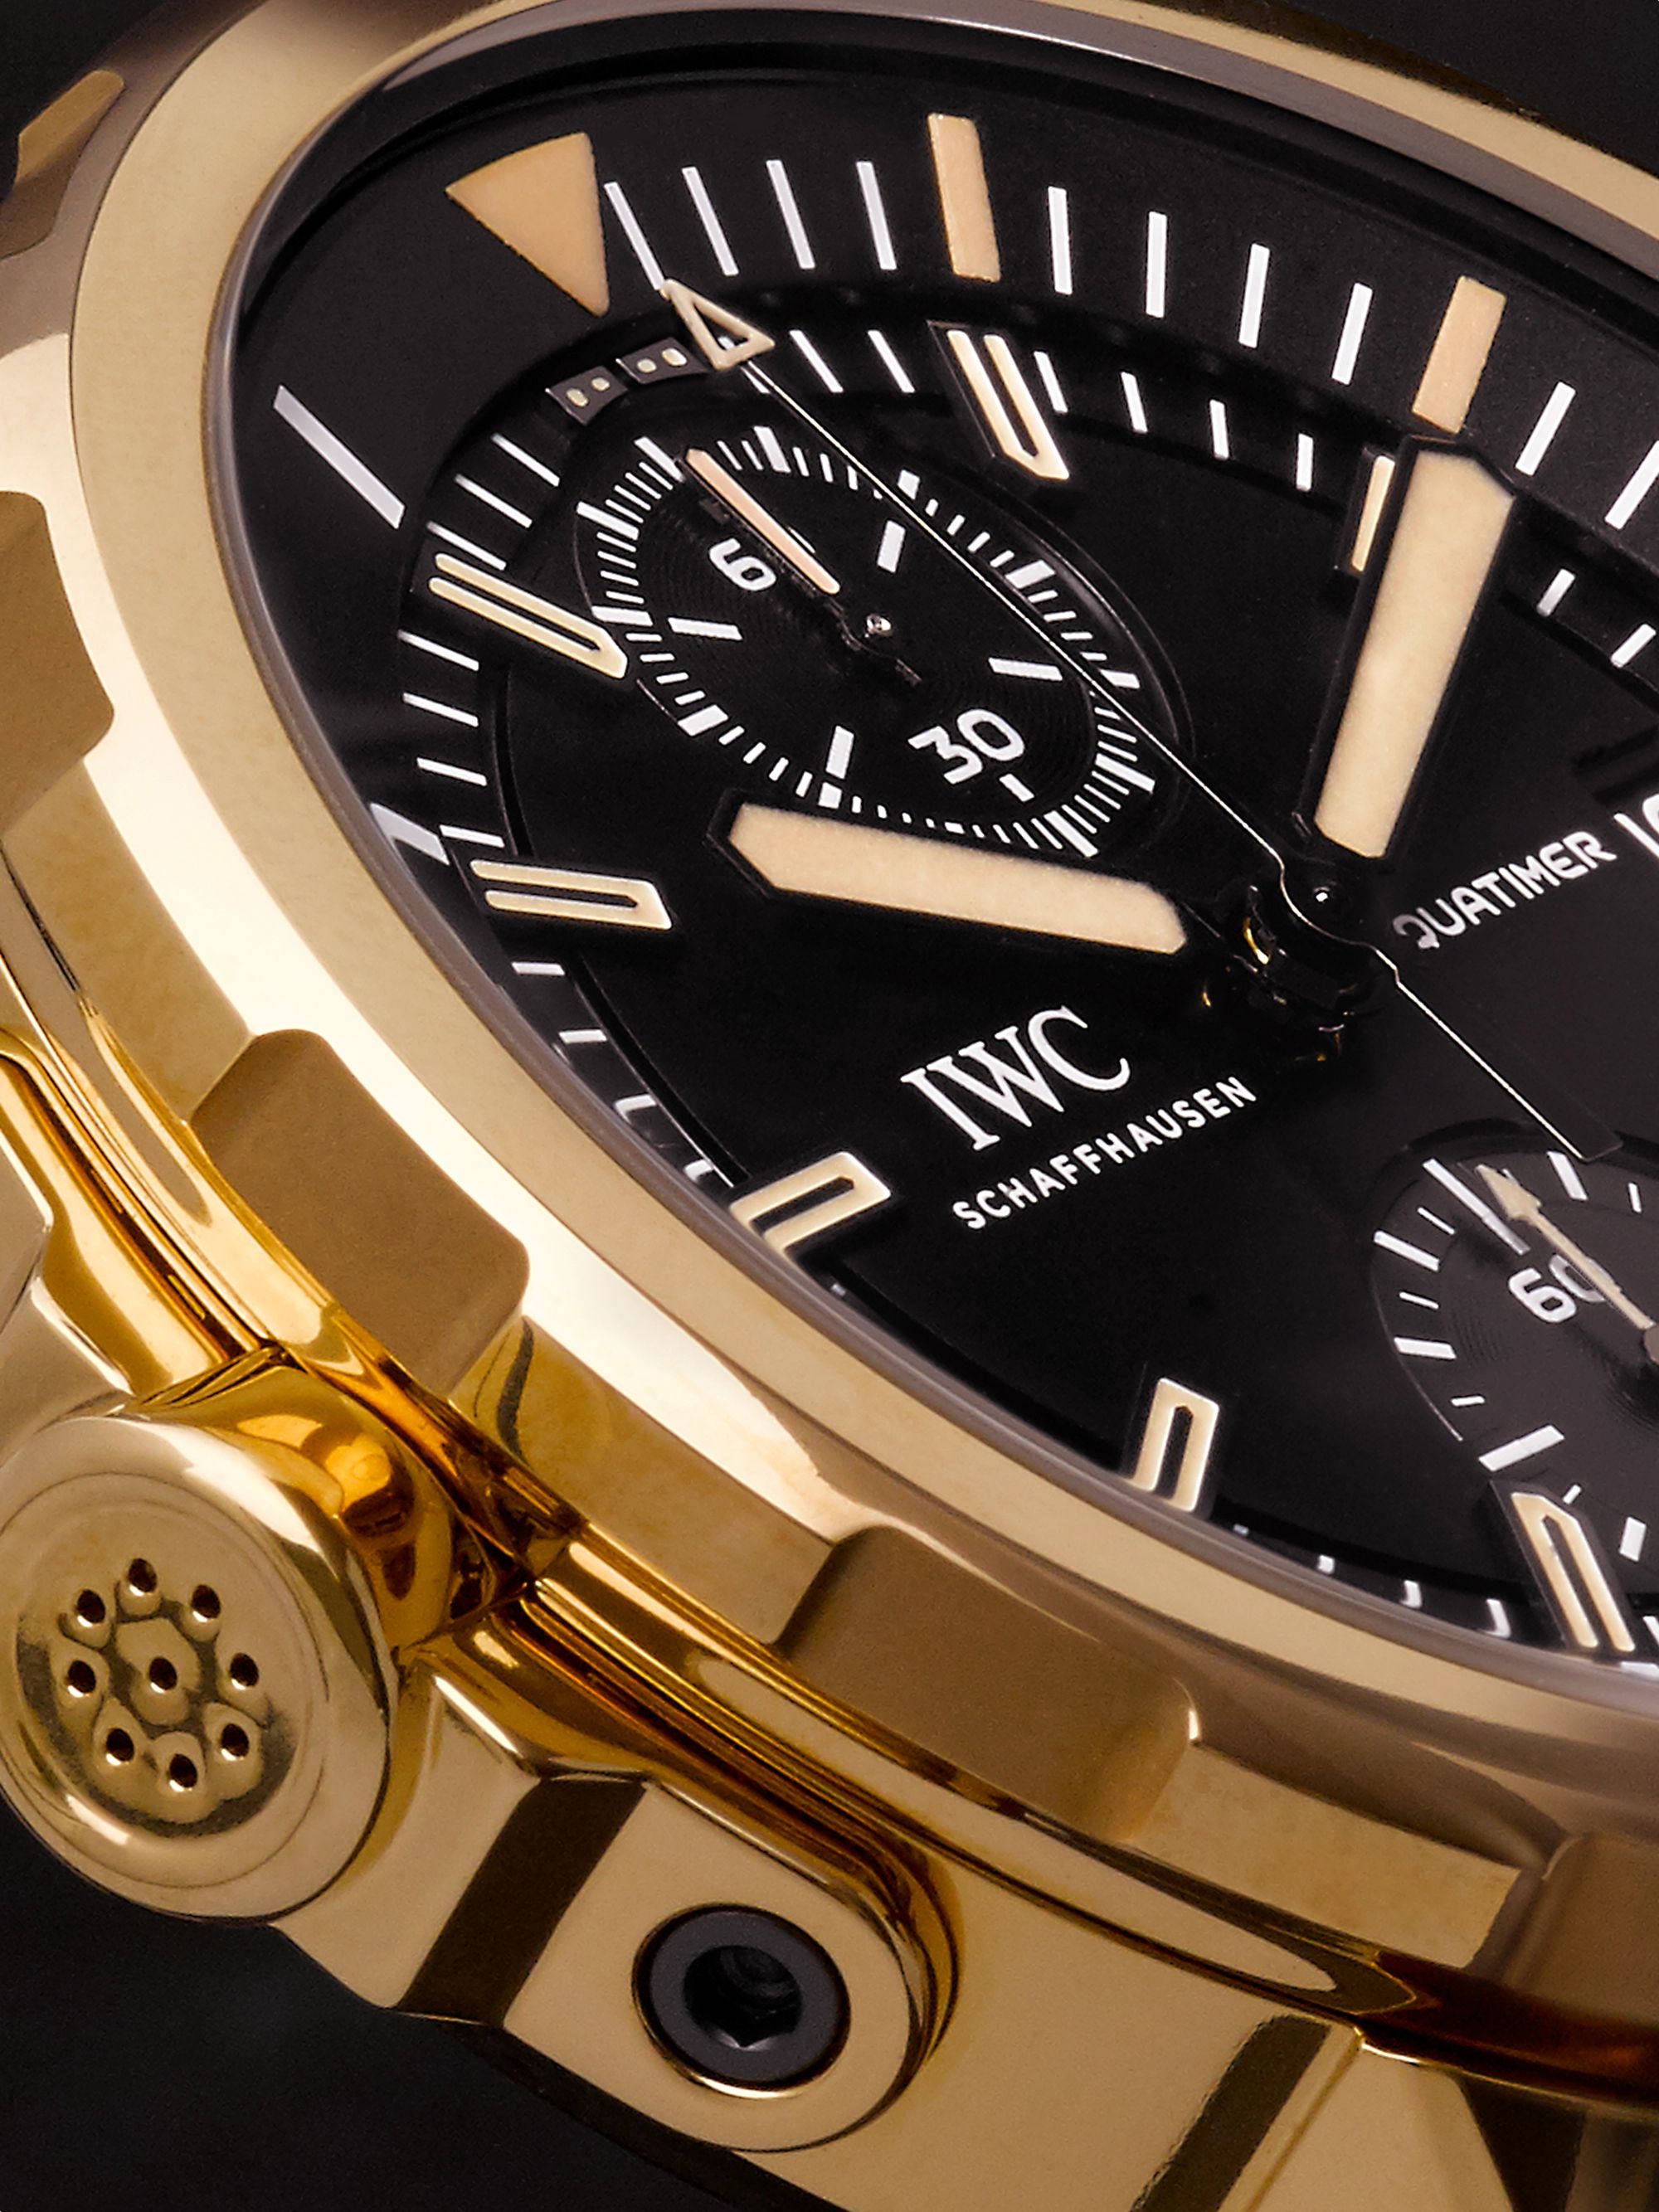 IWC SCHAFFHAUSEN Aquatimer Expedition Charles Darwin Automatic Chronograph 44mm Bronze and Rubber Watch, Ref. No. IW379503